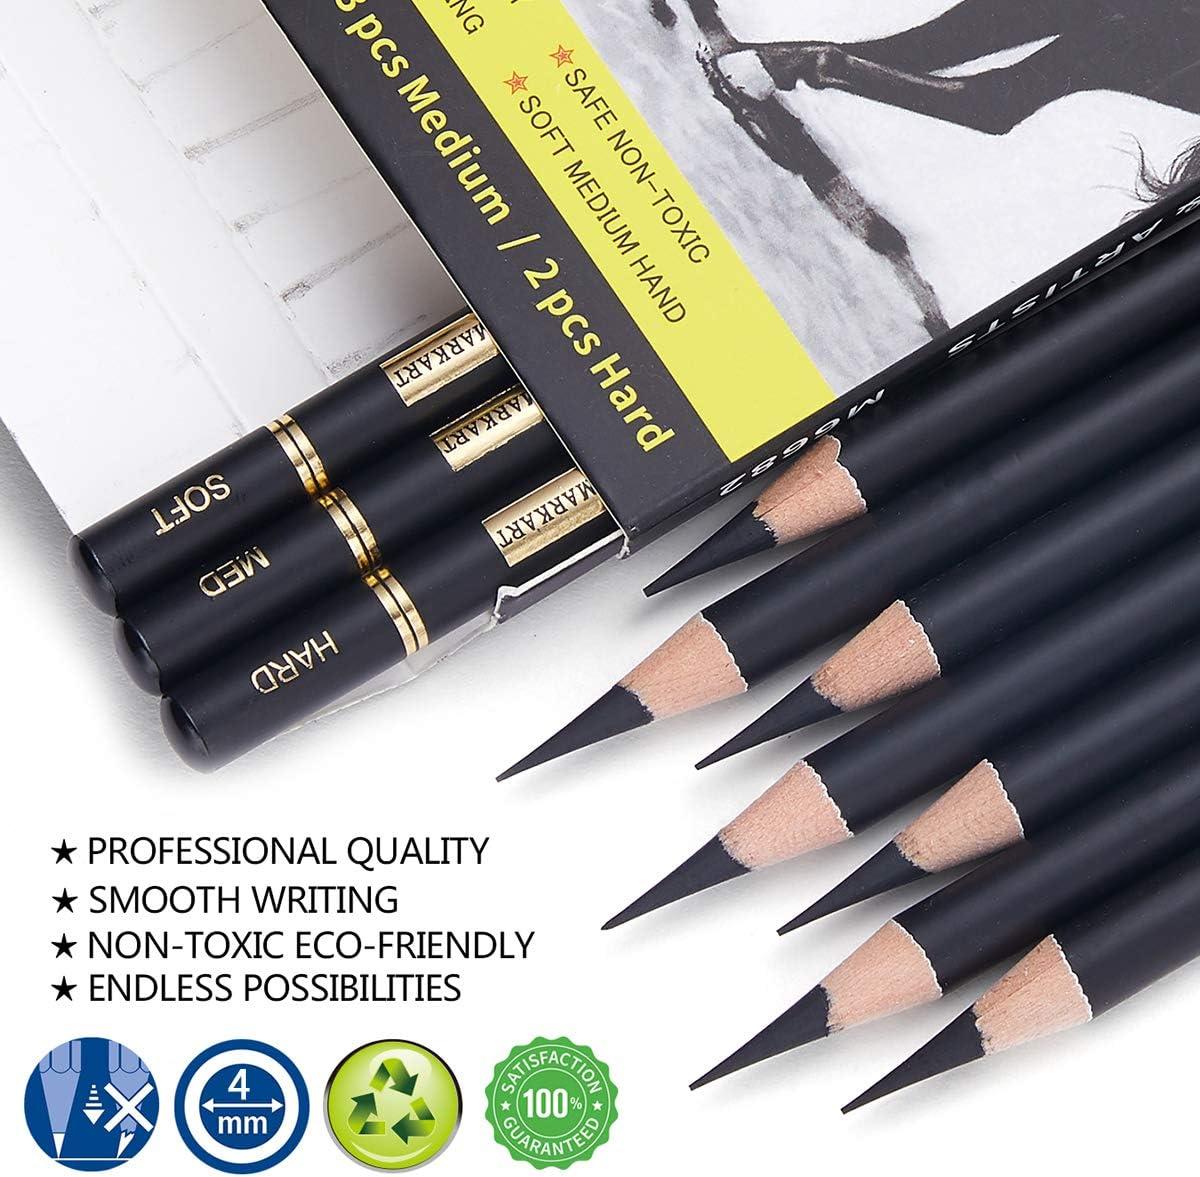 Set Of 10 Soft Vine Charcoal Pencils For Drawing, Sketching